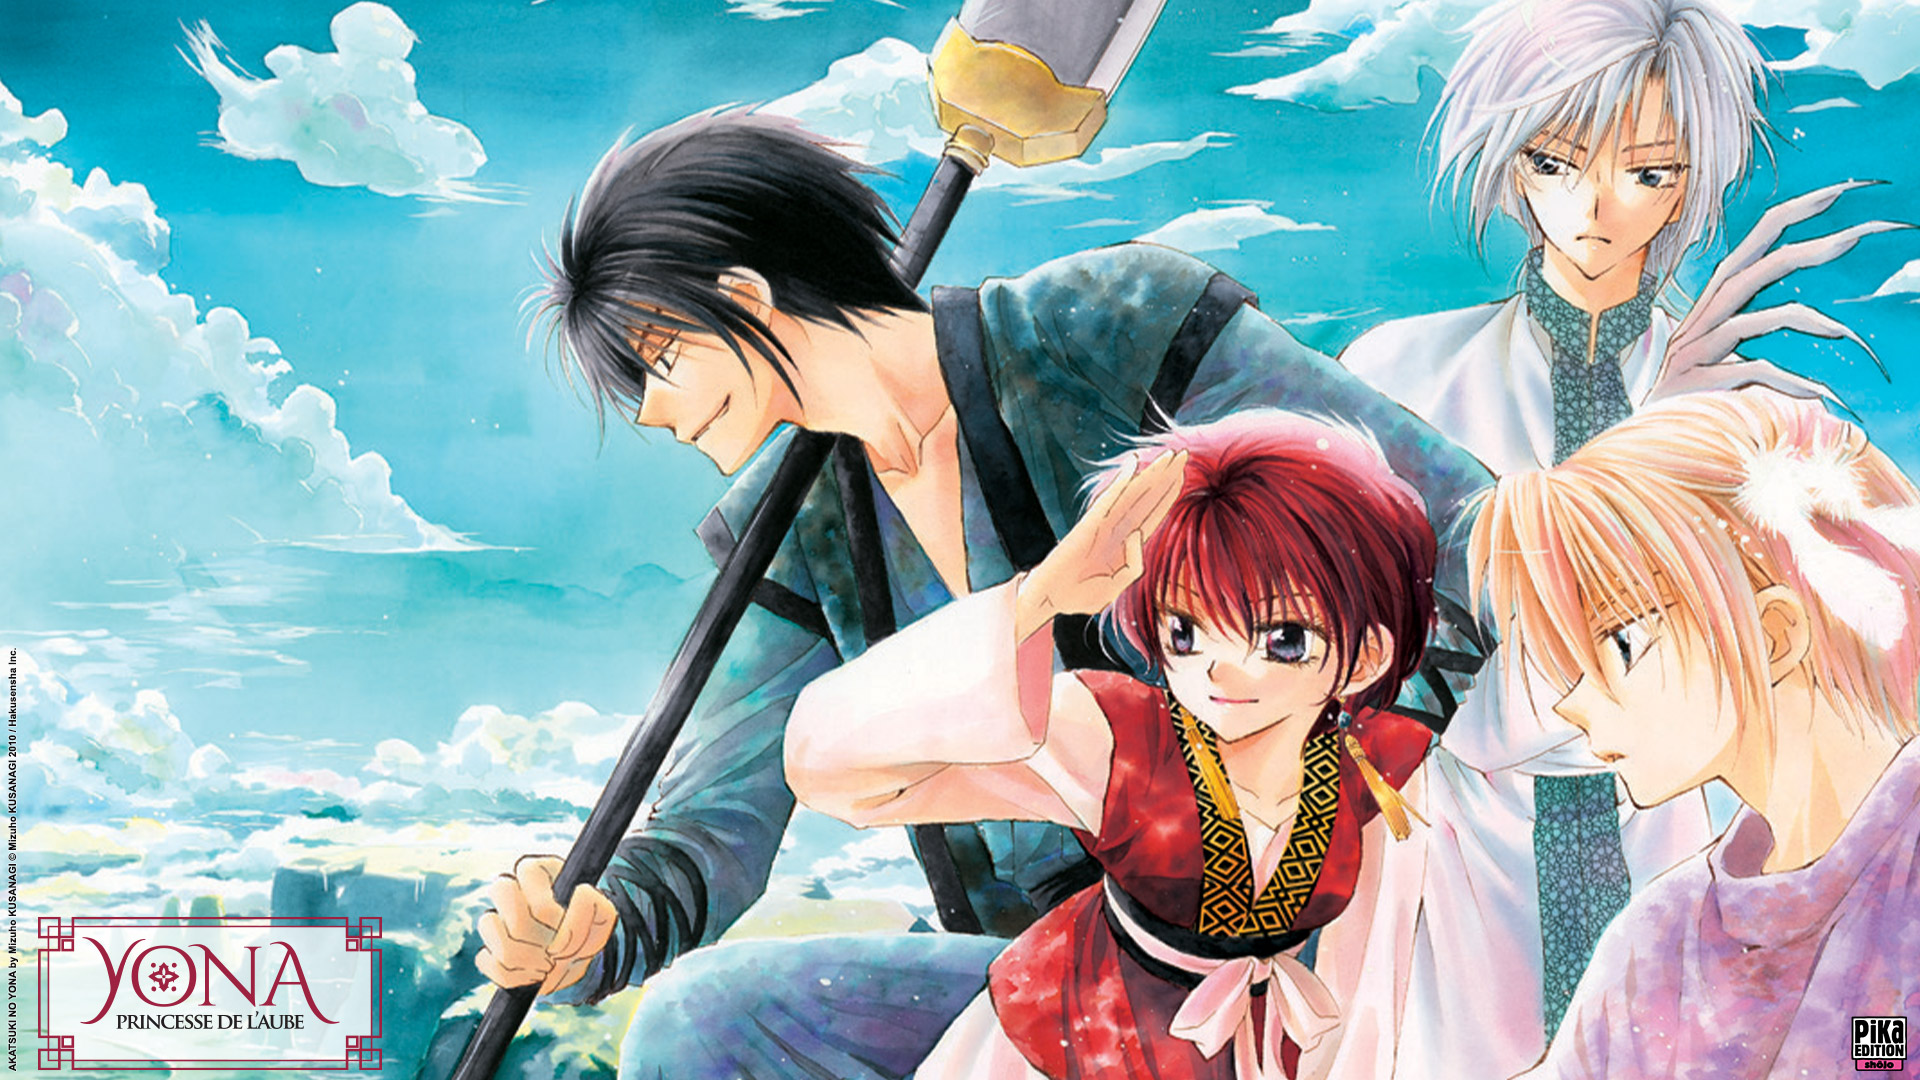 Akatsuki No Yona Wallpaper Released By The French Publisher Pika